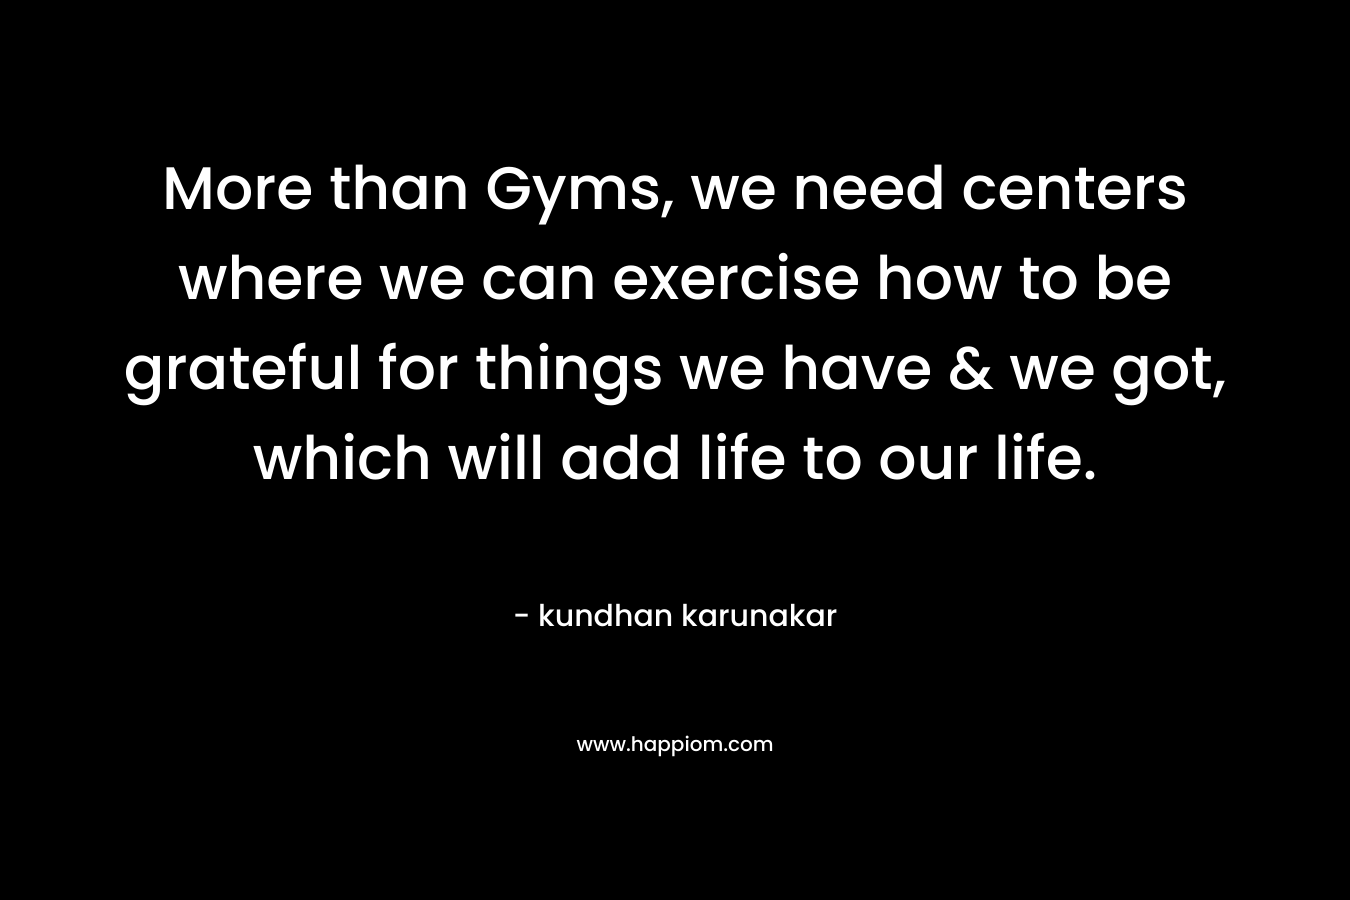 More than Gyms, we need centers where we can exercise how to be grateful for things we have & we got, which will add life to our life.